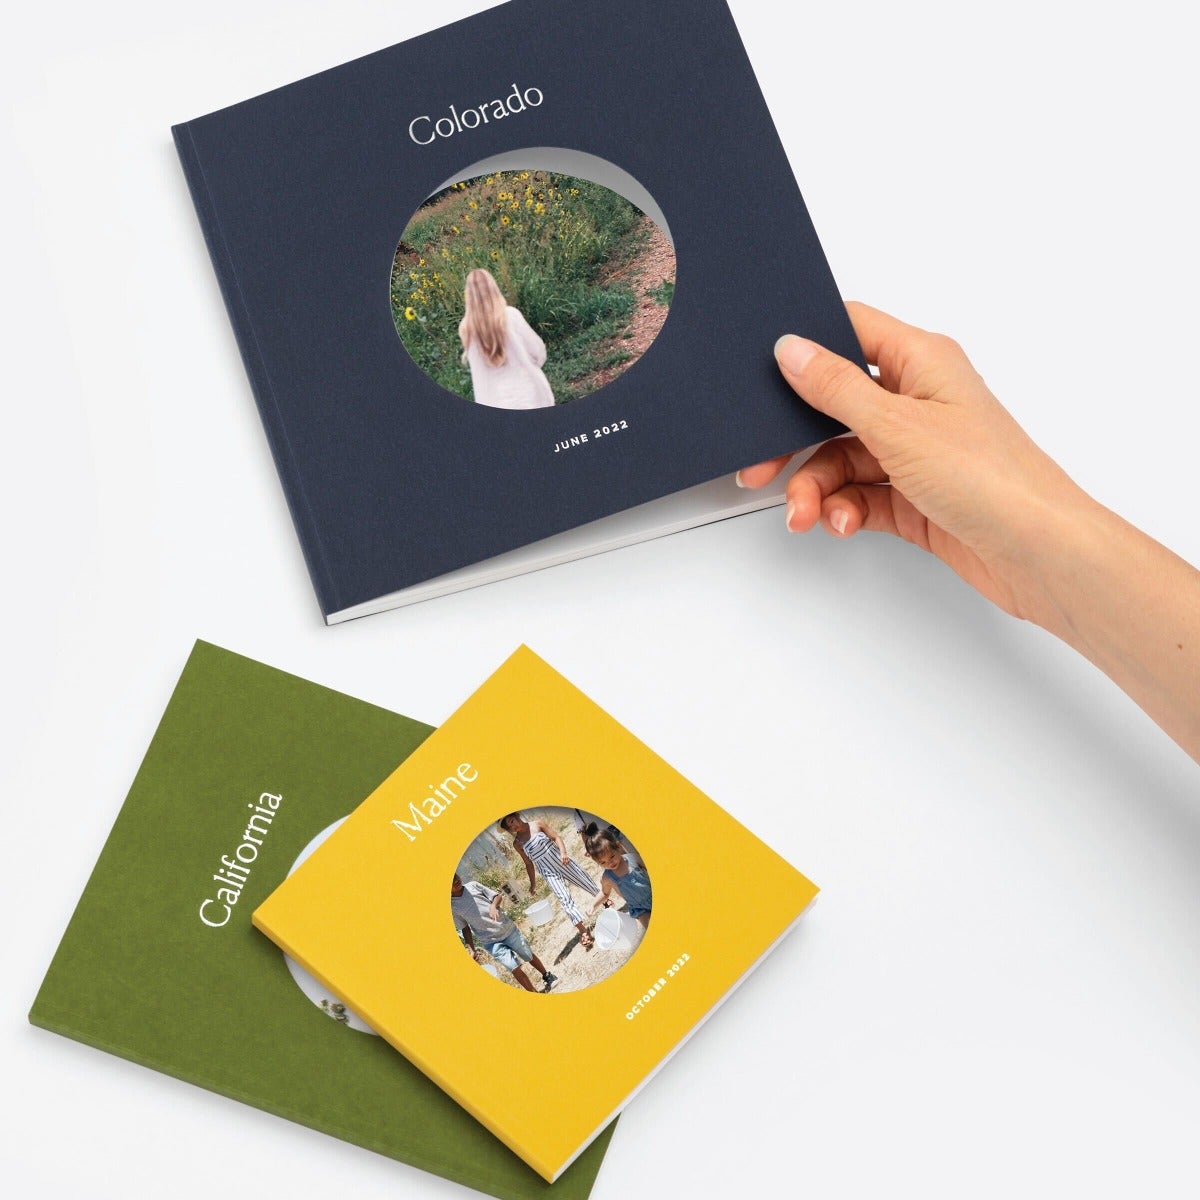 Color Series, Start a Photo Book Collection